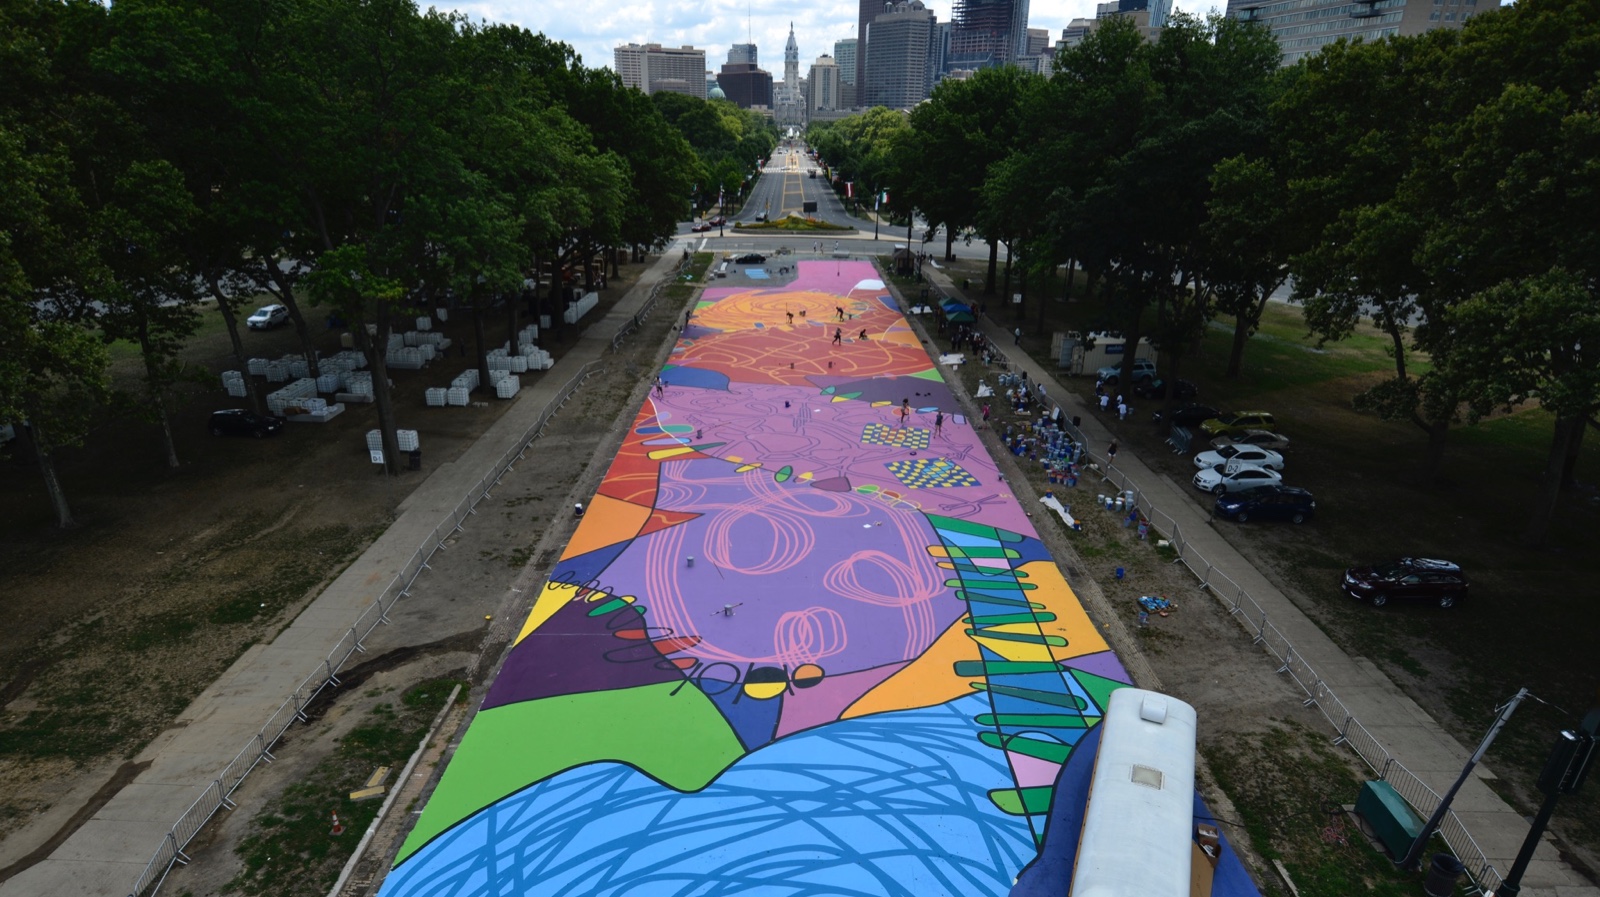 View towards City Hall on 'Rhythm & Hues' at Eakins Oval. (Bastiaan Slabbers for NewsWorks)